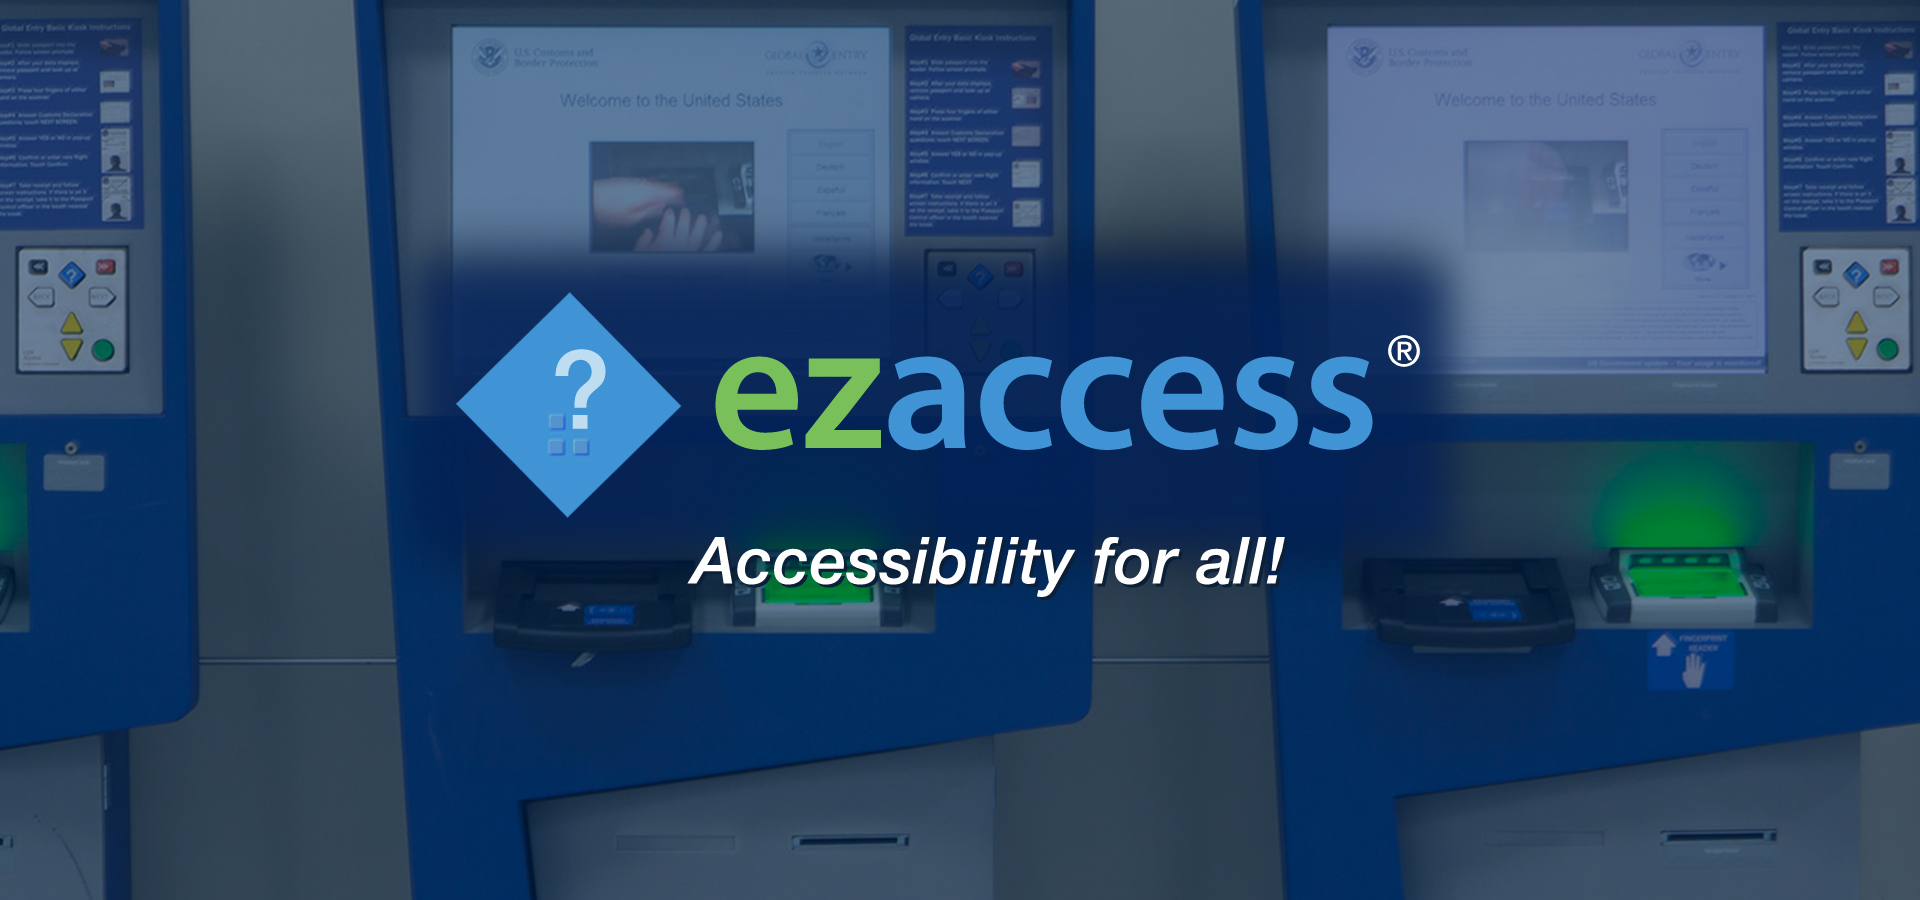 EZ Access technology used in border patrol passport kiosks at airports that offer accessibility for all.